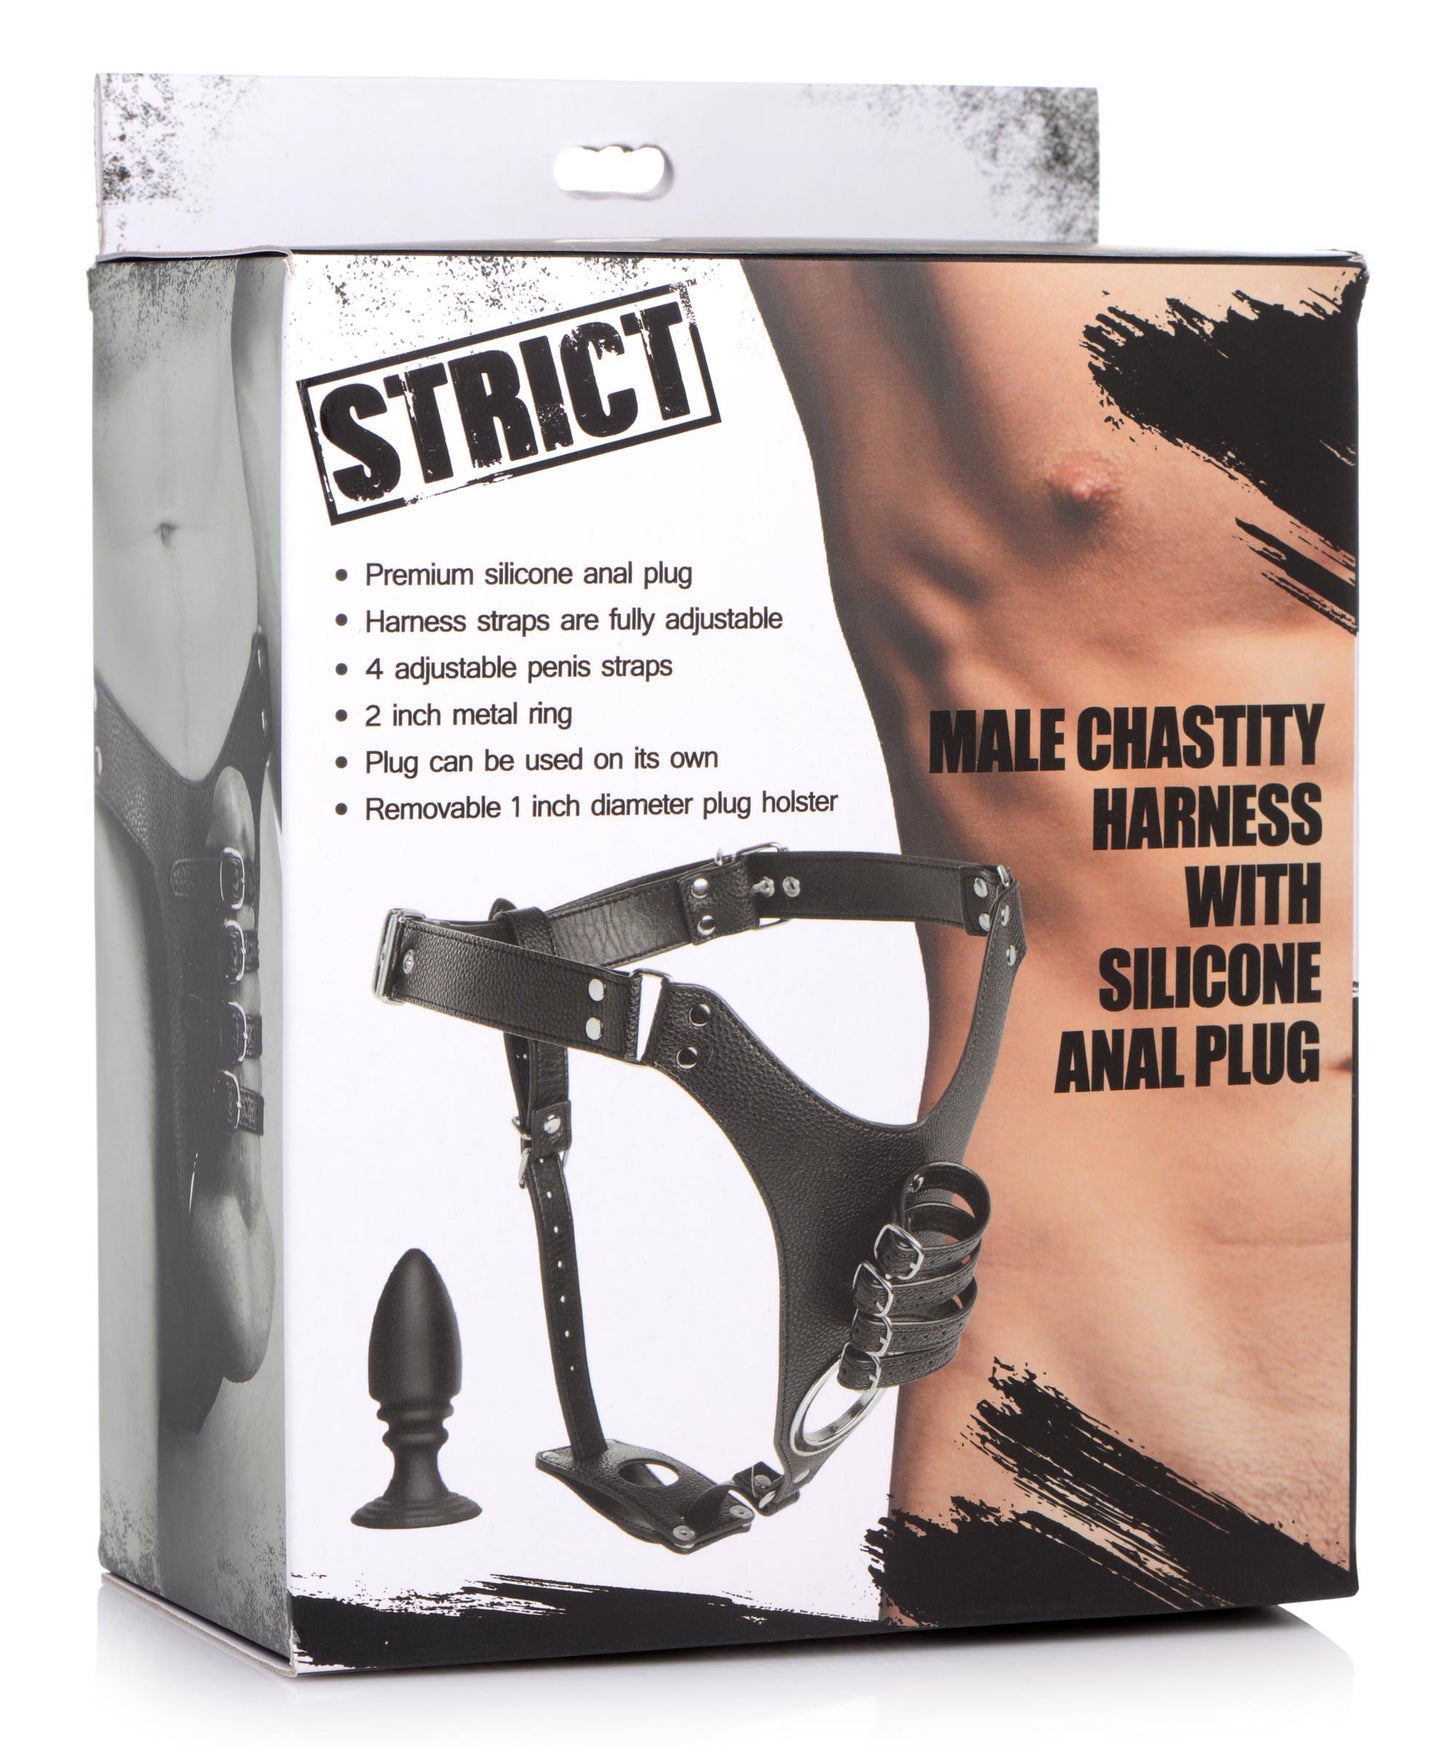 Male Chastity Harness with Silicone Anal Plug - UABDSM